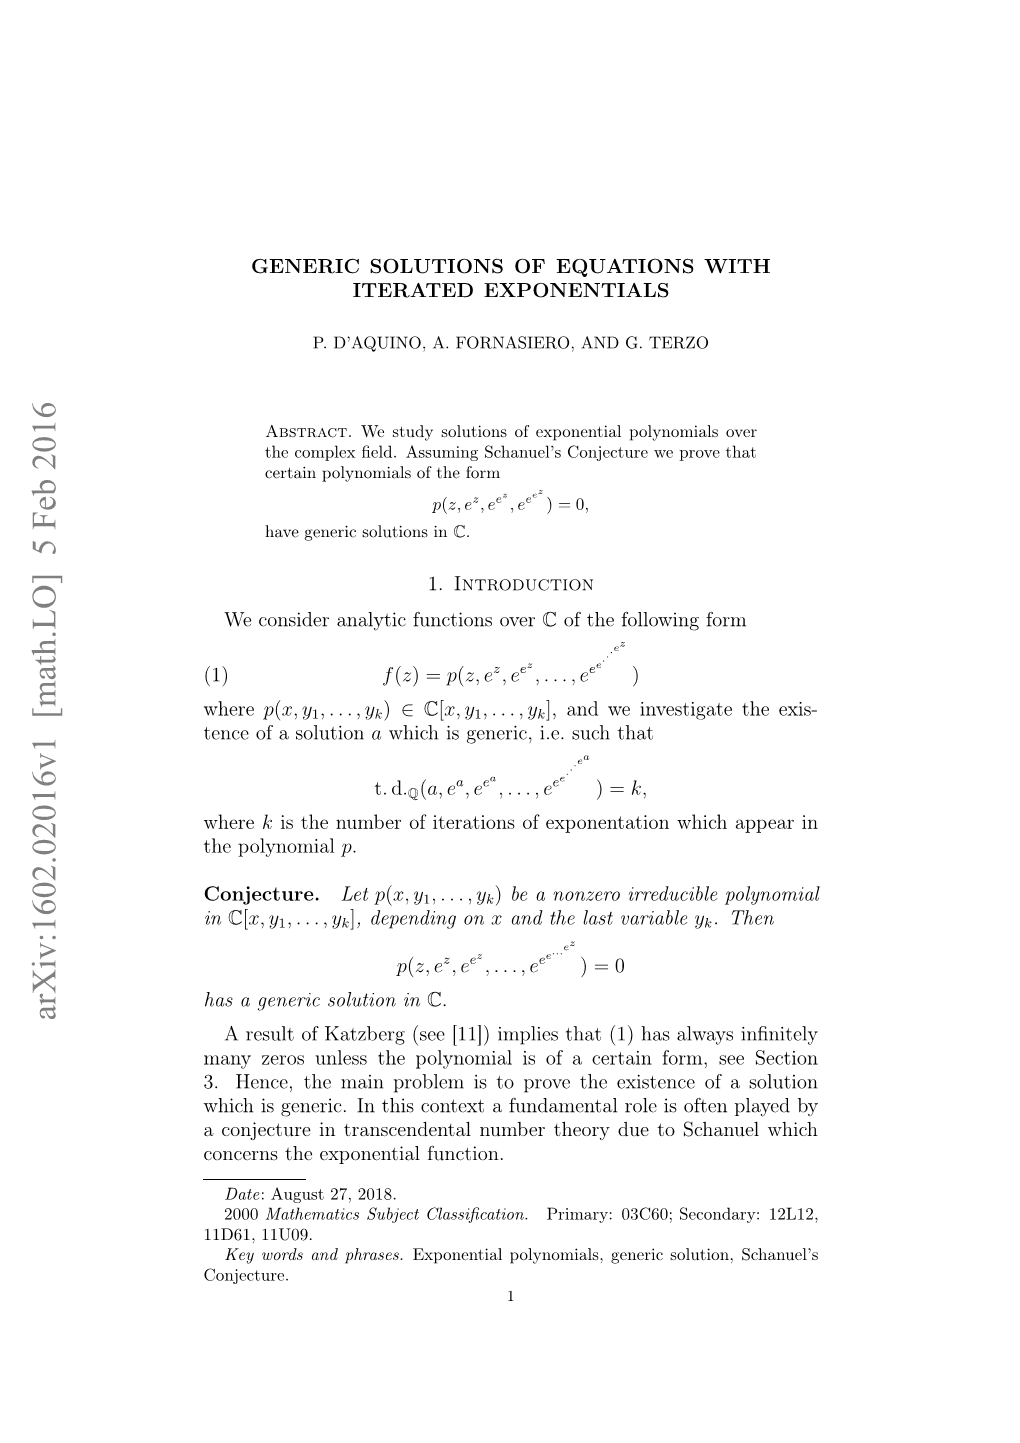 Generic Solutions of Equations with Iterated Exponentials